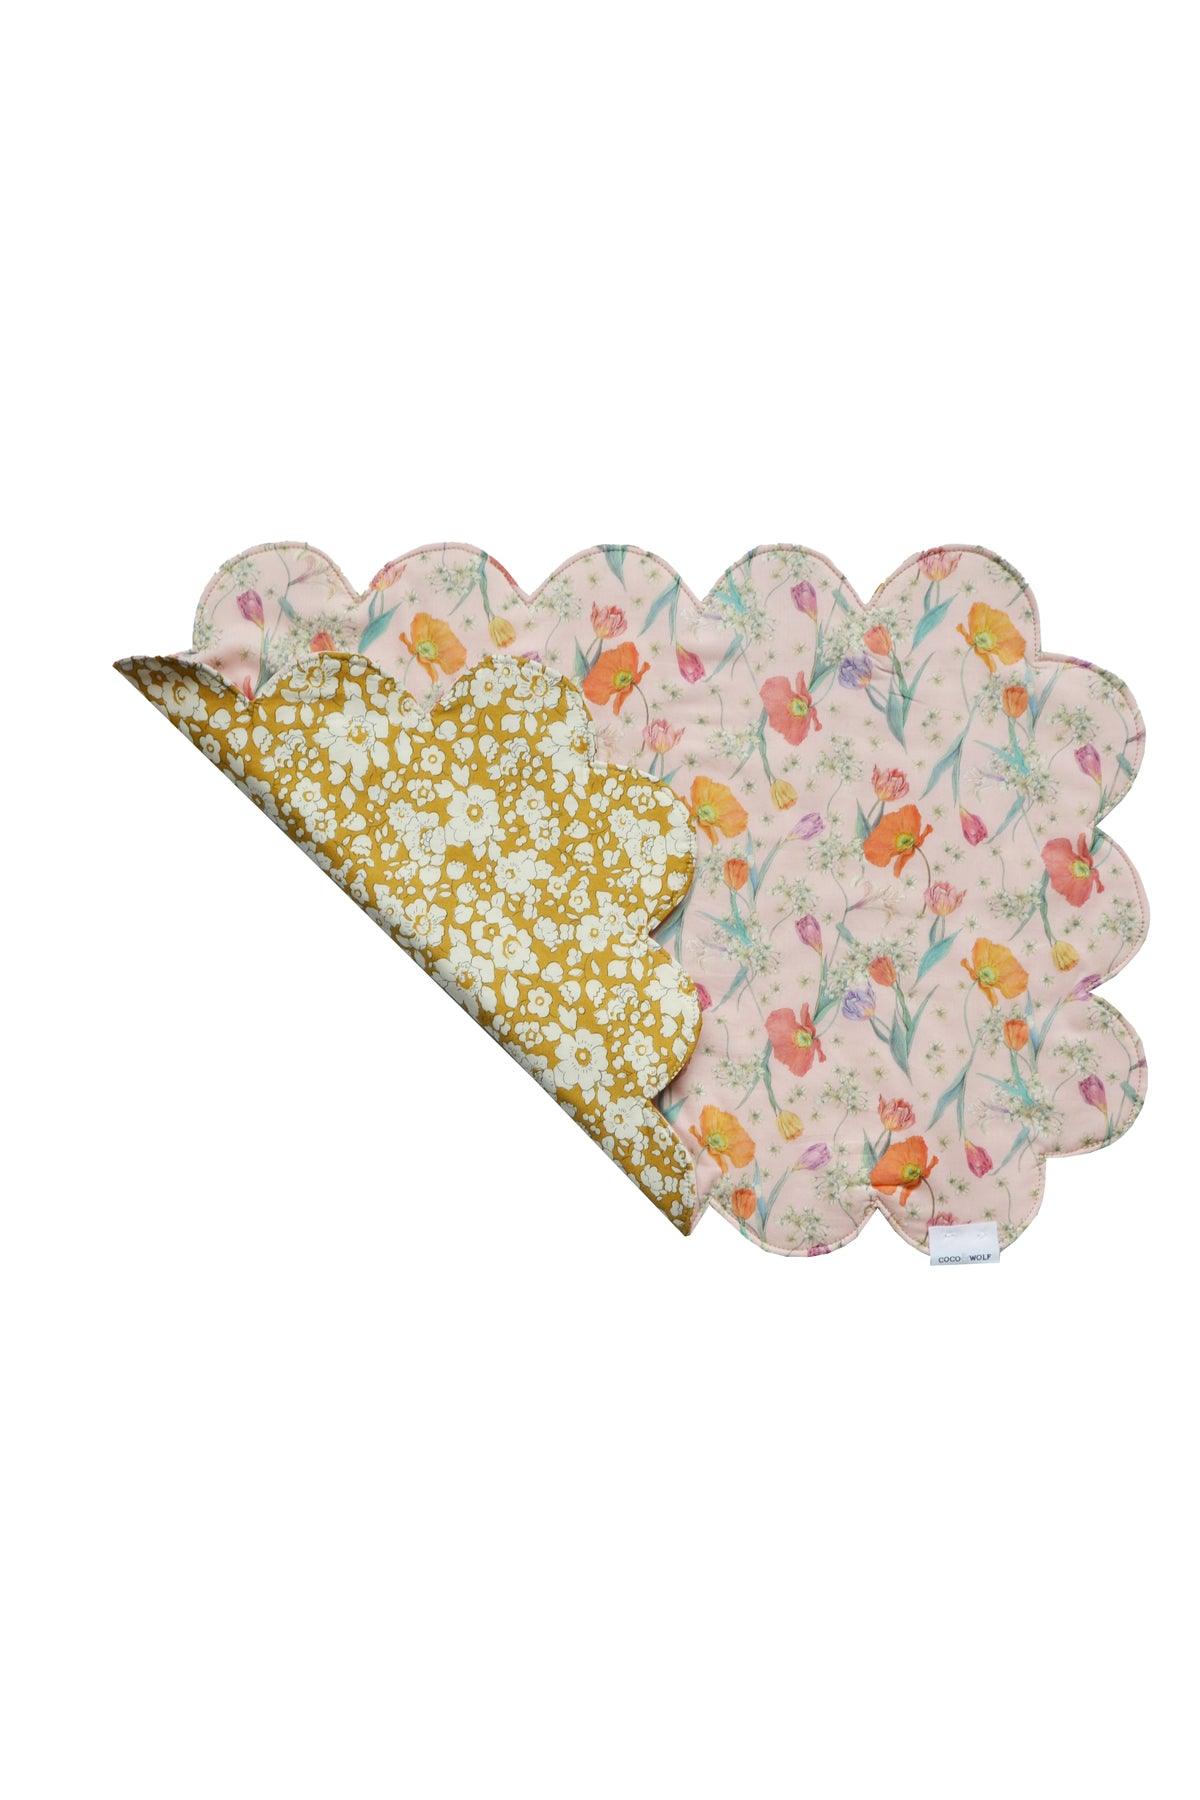 Reversible Cloud Scallop Placemat made with Liberty Fabric SPRING BLOOMS & BETSY BOO - Coco & Wolf